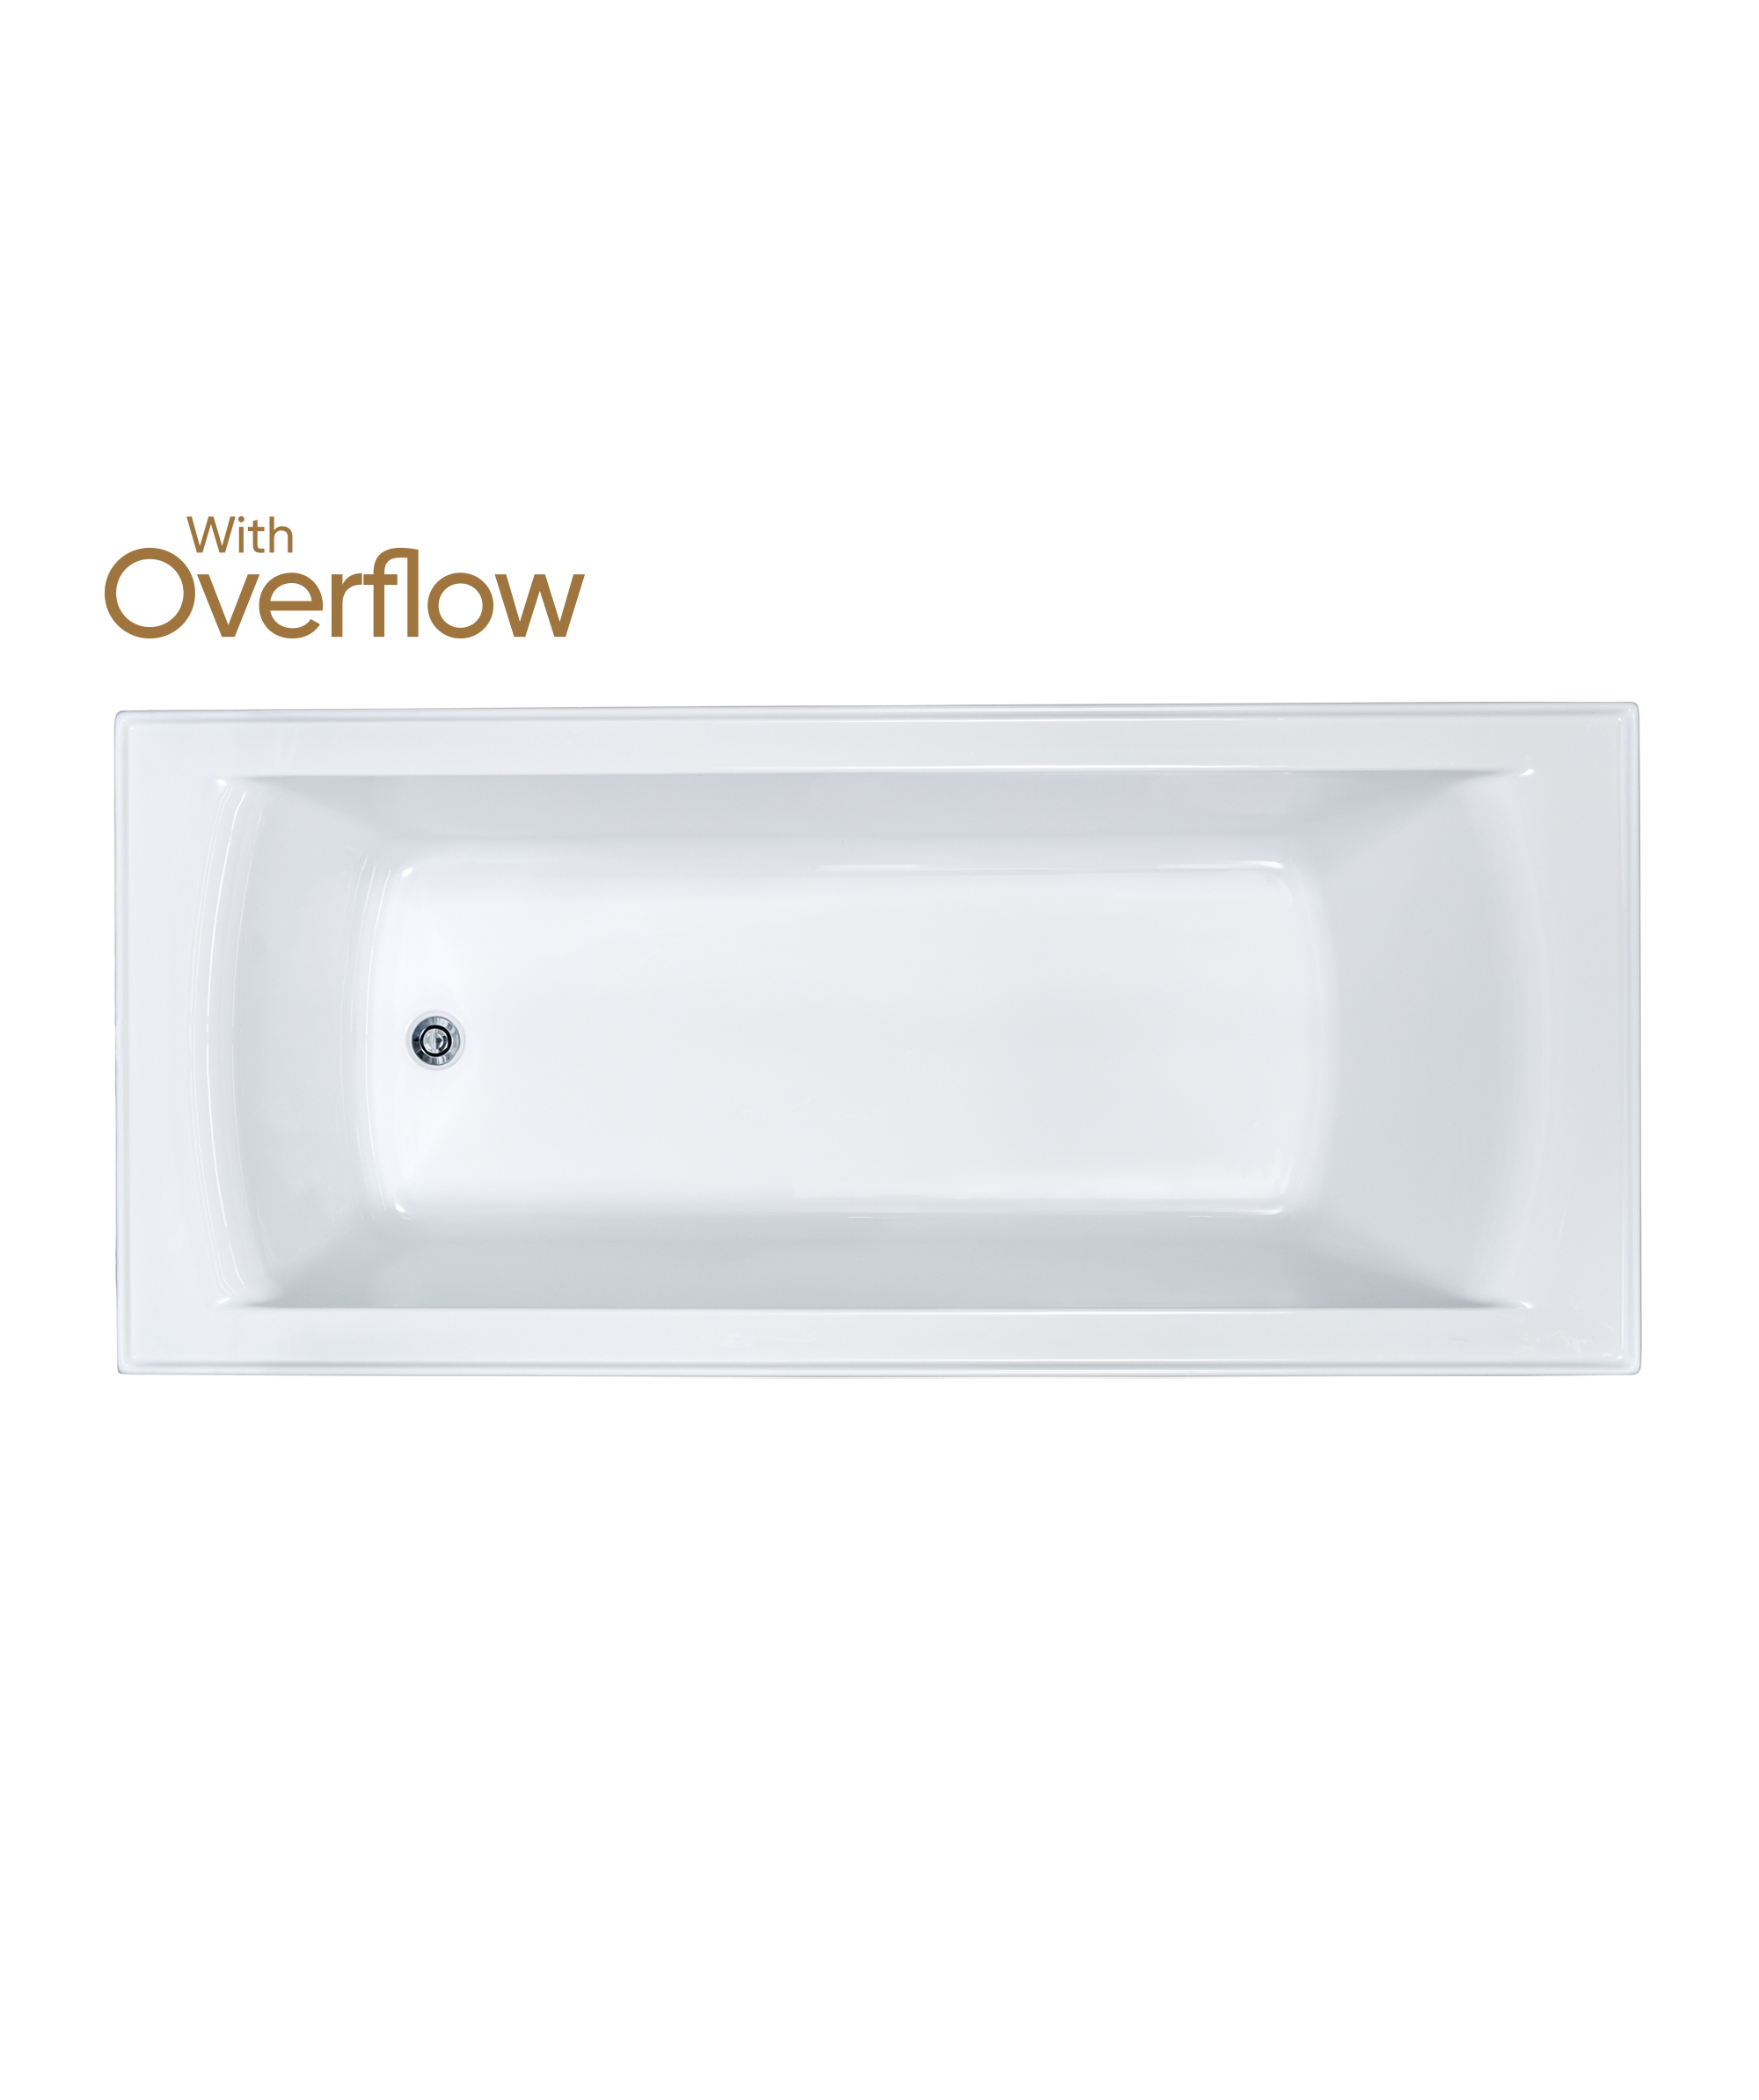 Syros 103 Select inset bath - with Overflow Basic and Plug+Waste - 2 sizes